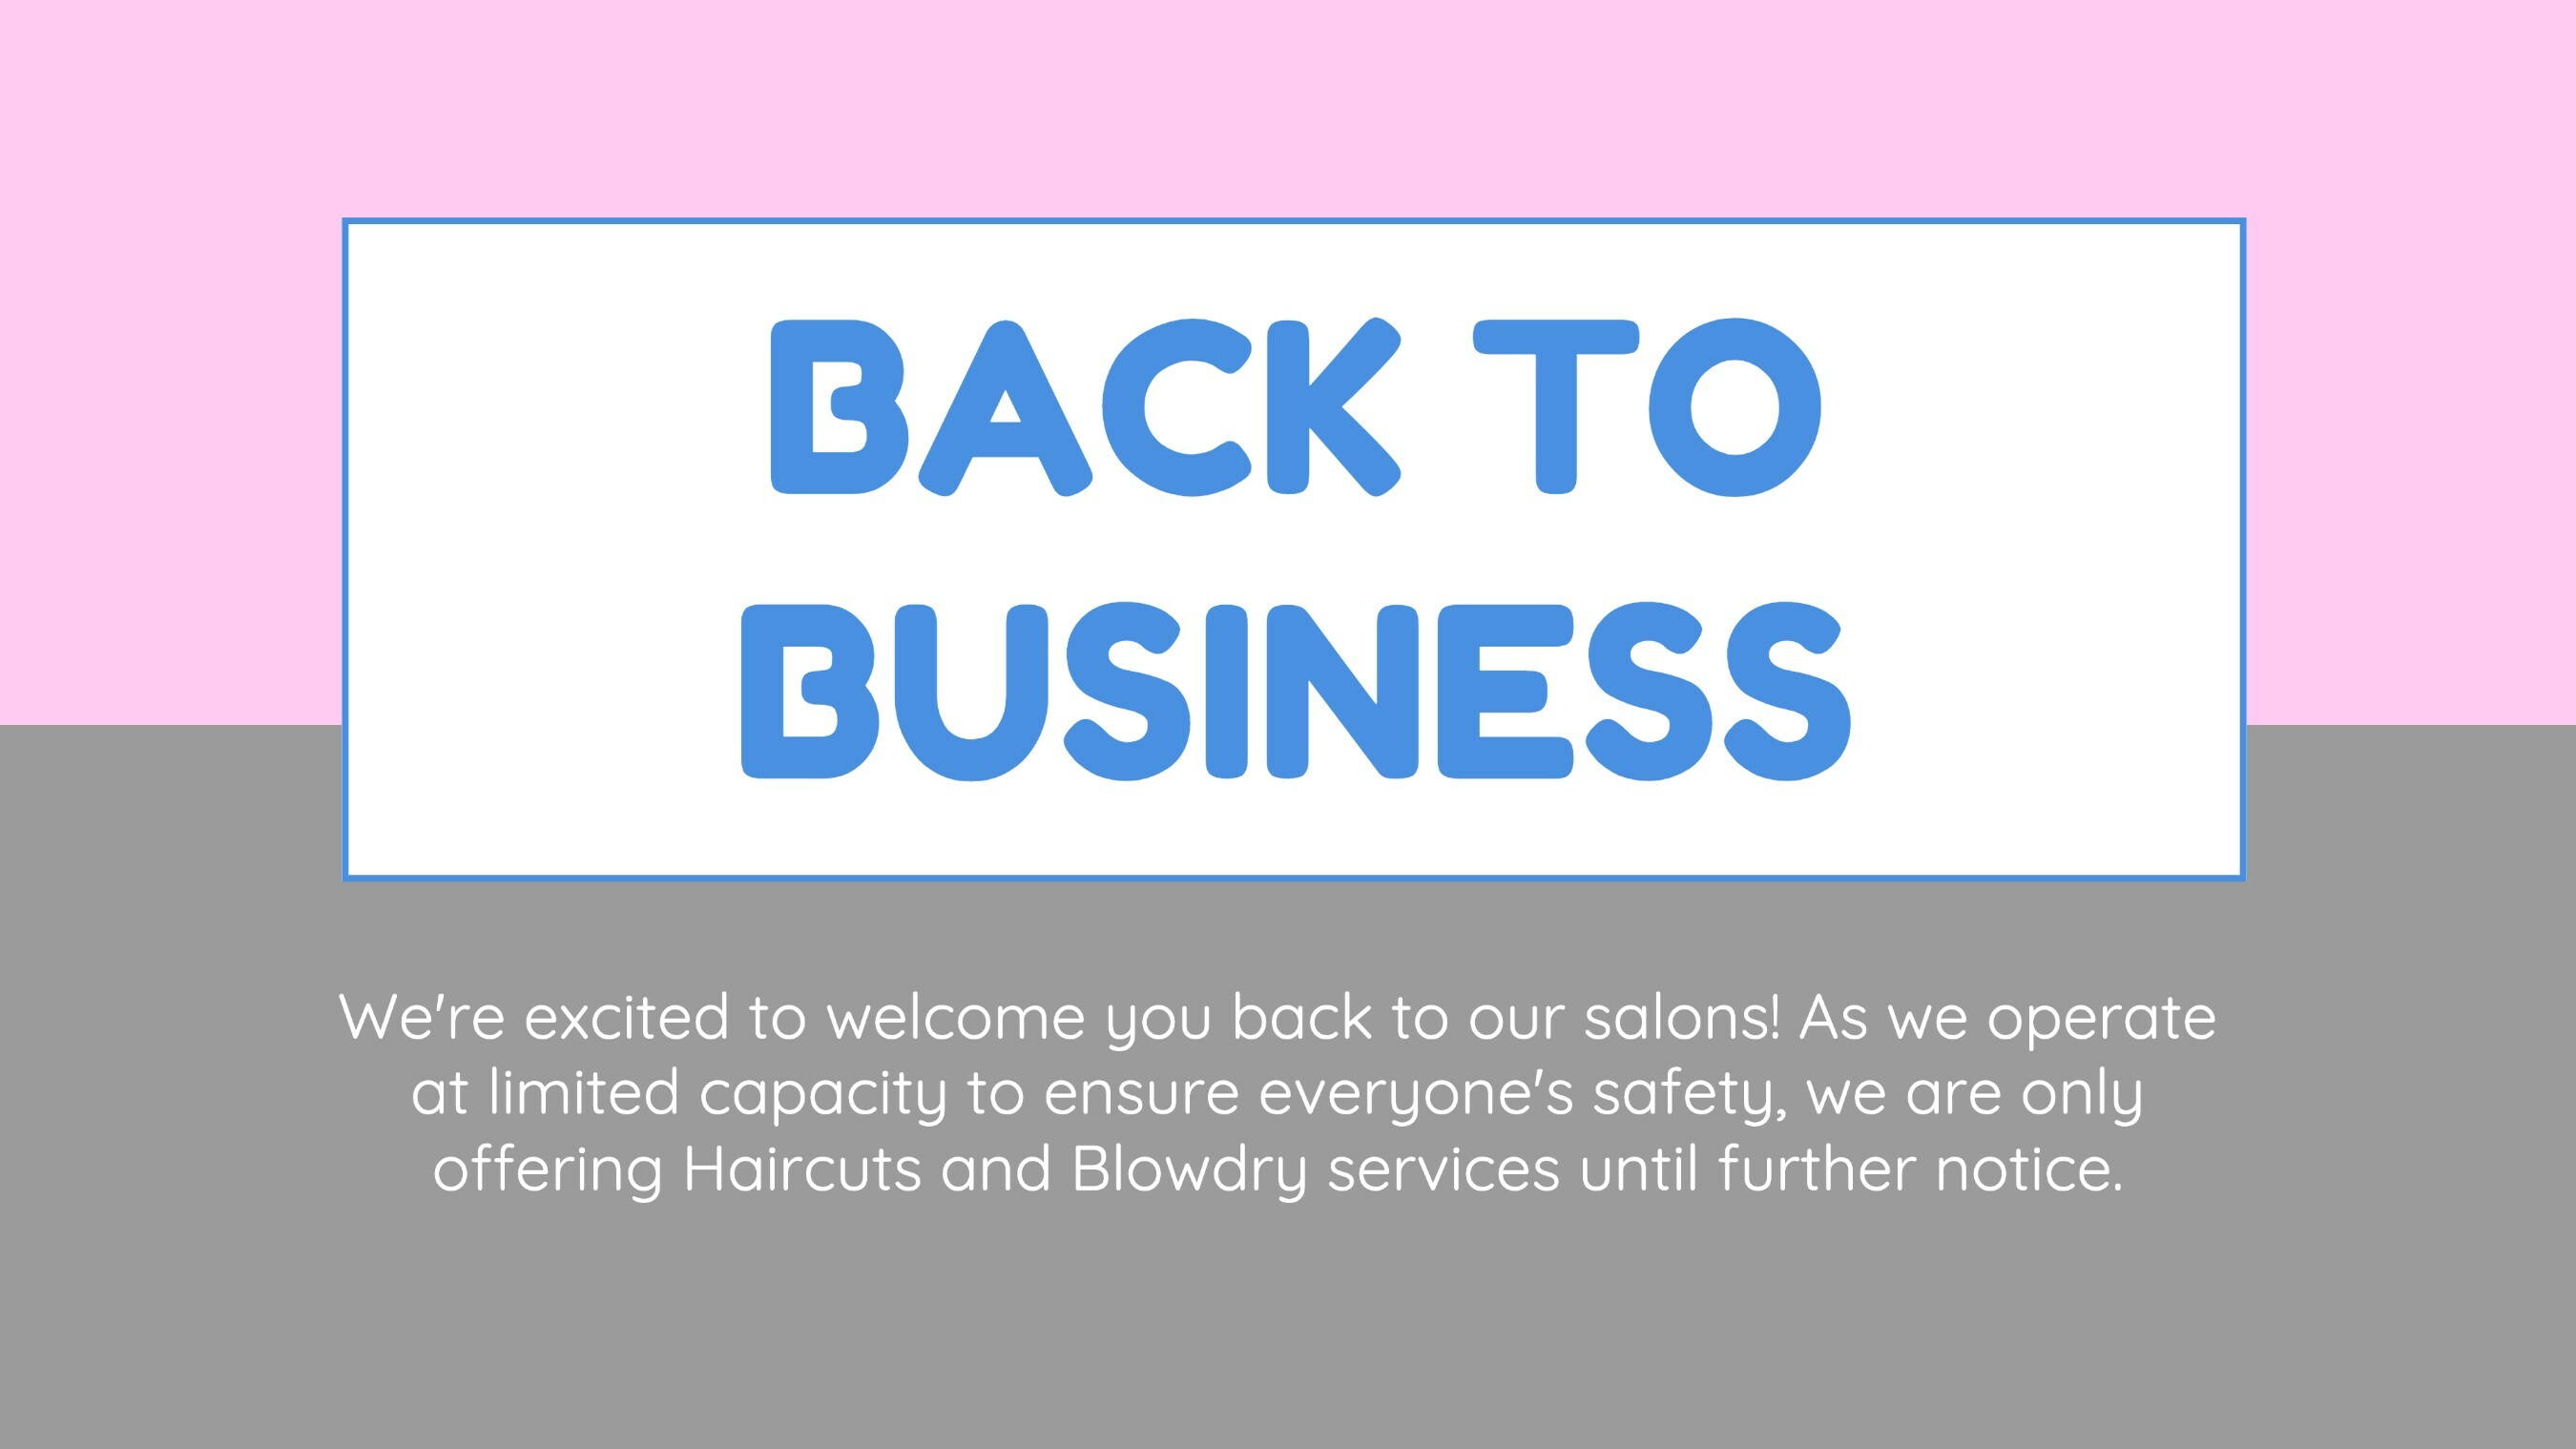 Salon back to business promo template